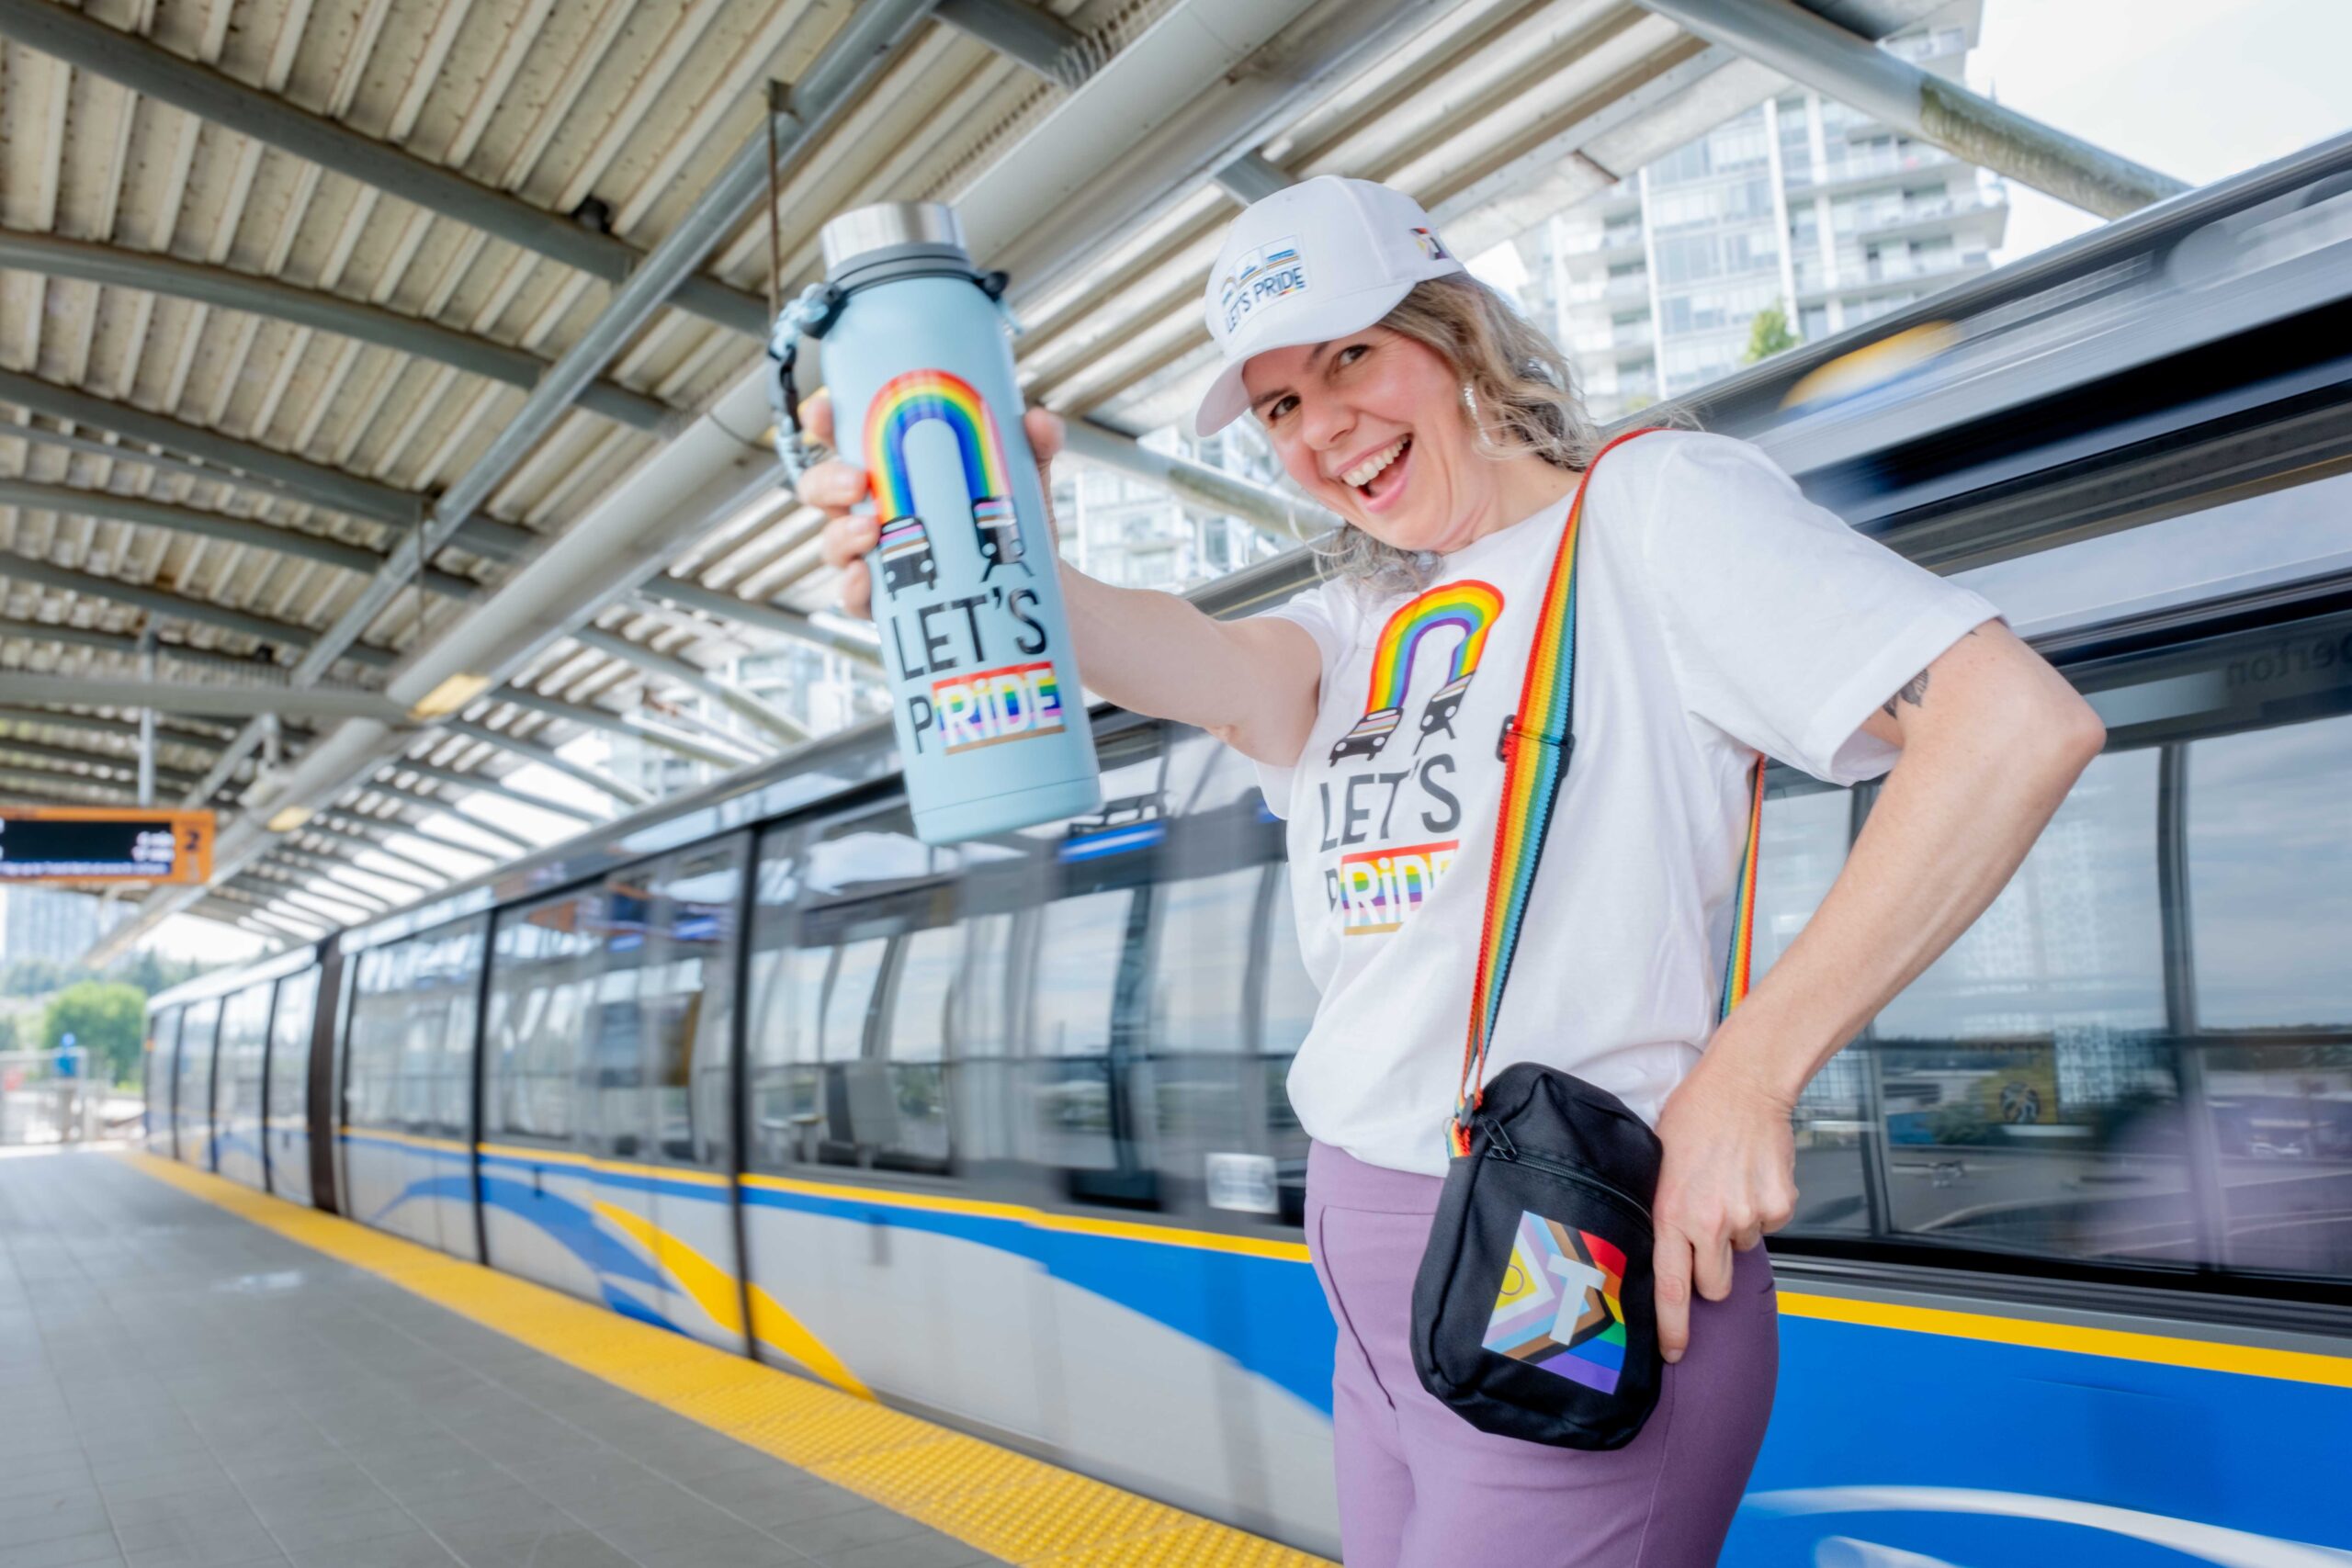 Pride-themed merchandise from the TransLink Store